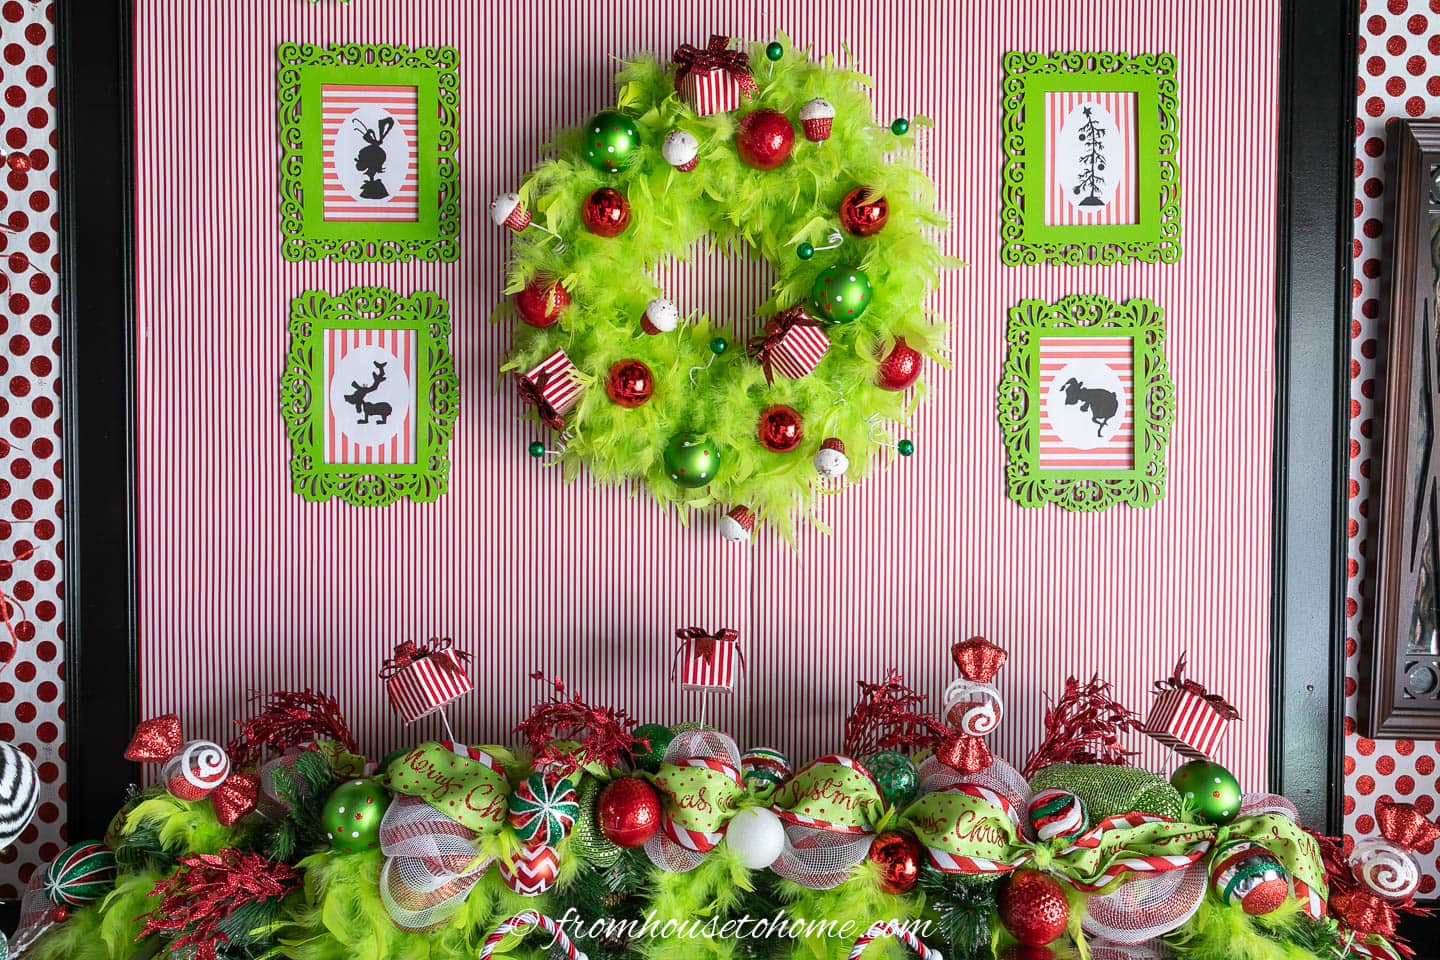 Top of the Grinch Christmas mantel garland under a Grinch wreath